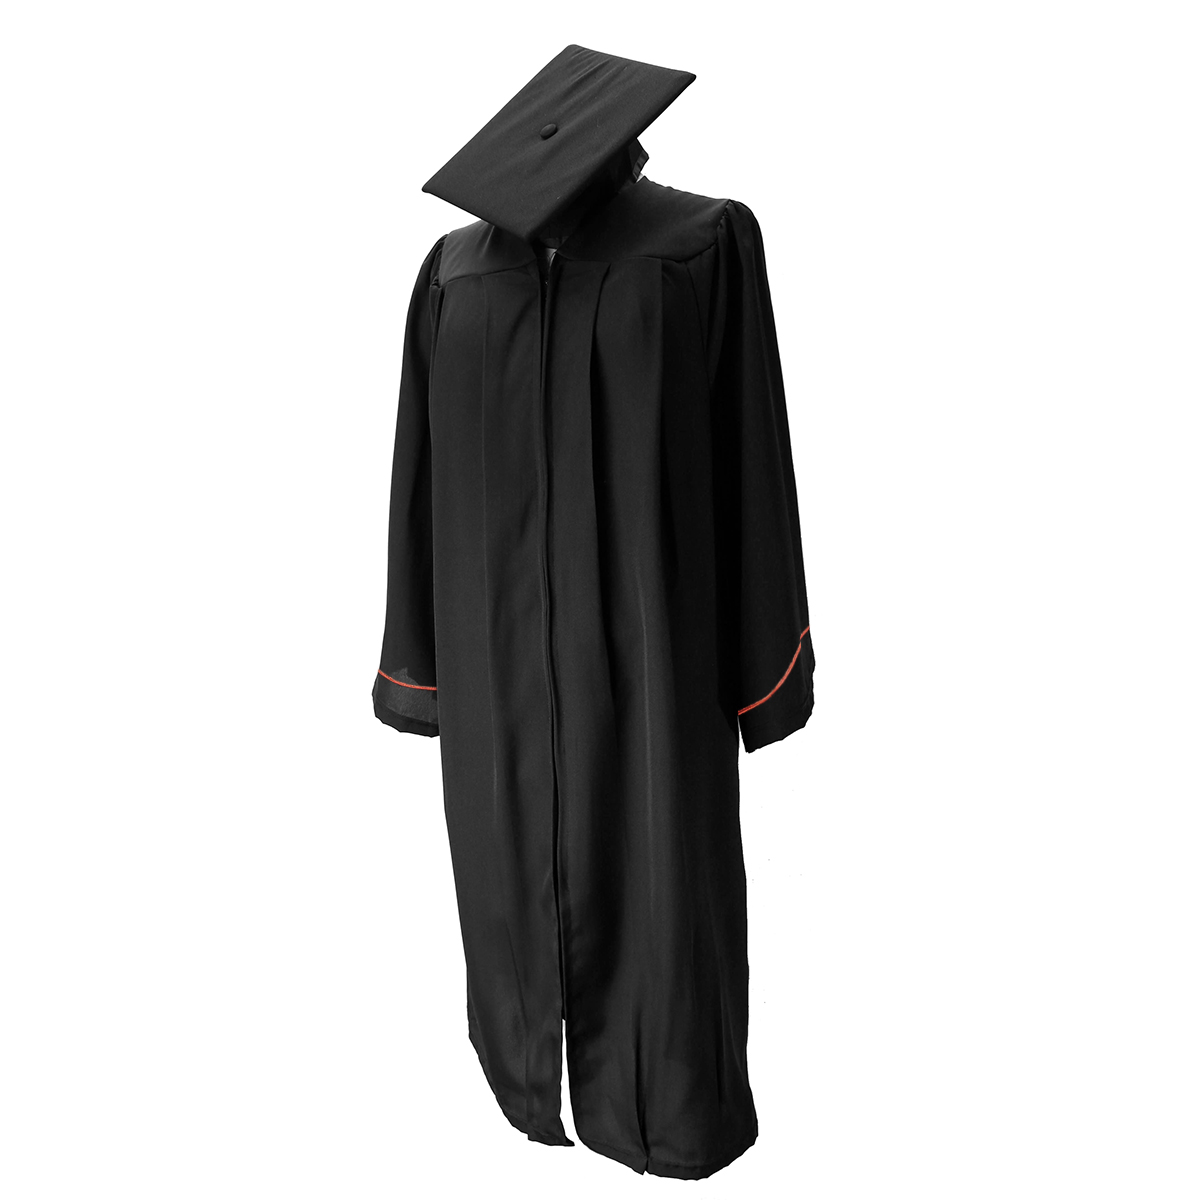 Unisex Academic Dress Bachelor Clothing Agricultural Science Technology Graduate  Bachelor Clothing Graduation Gown Caps-in School Uniforms from Novelty &  Specia…